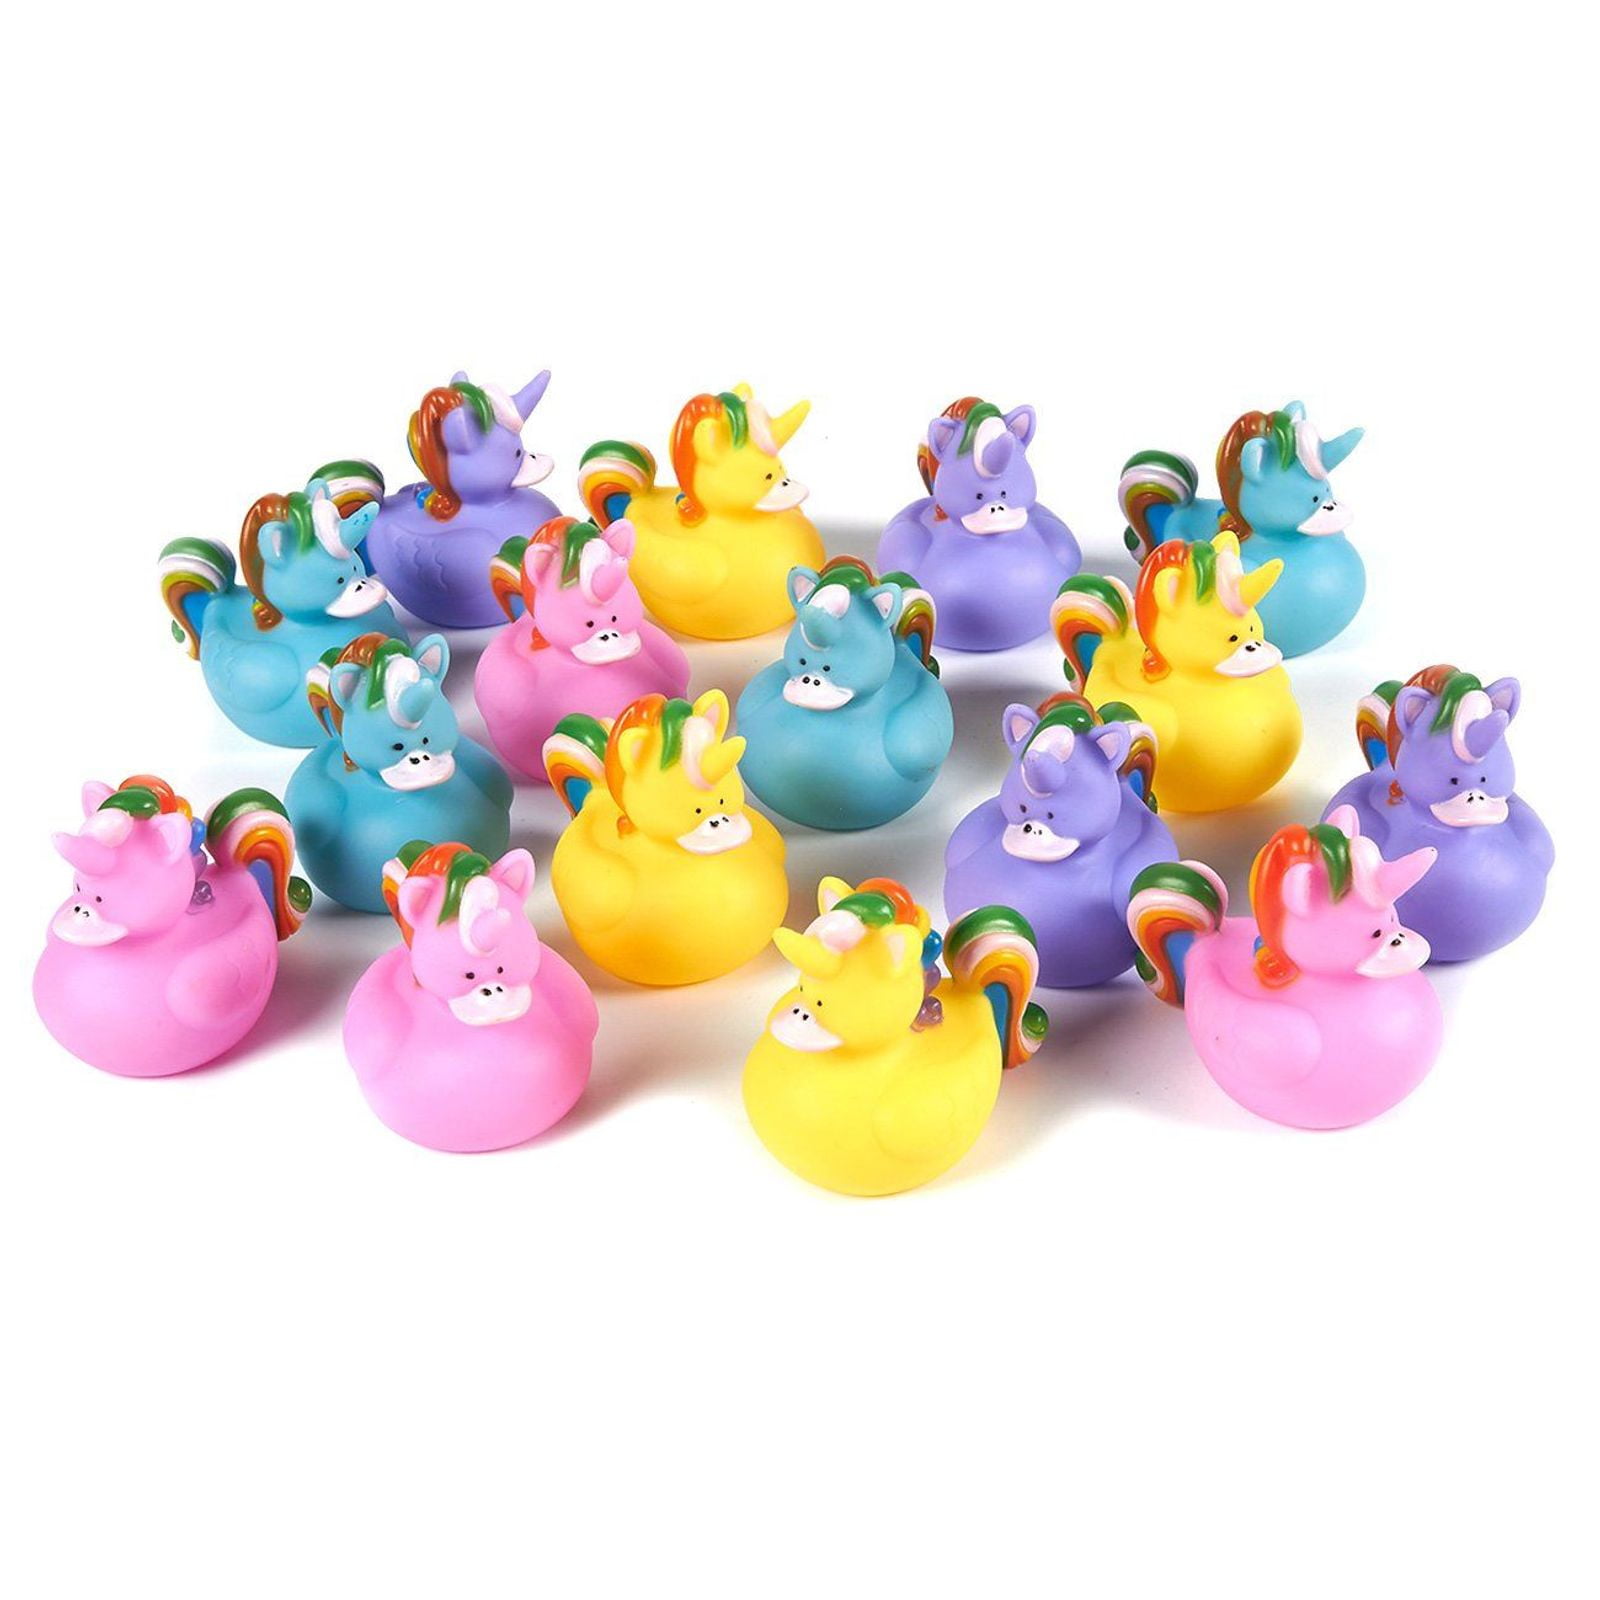 BRAND NEW Unicorn Bath Toy Girly Version Of Classic Rubber Duck